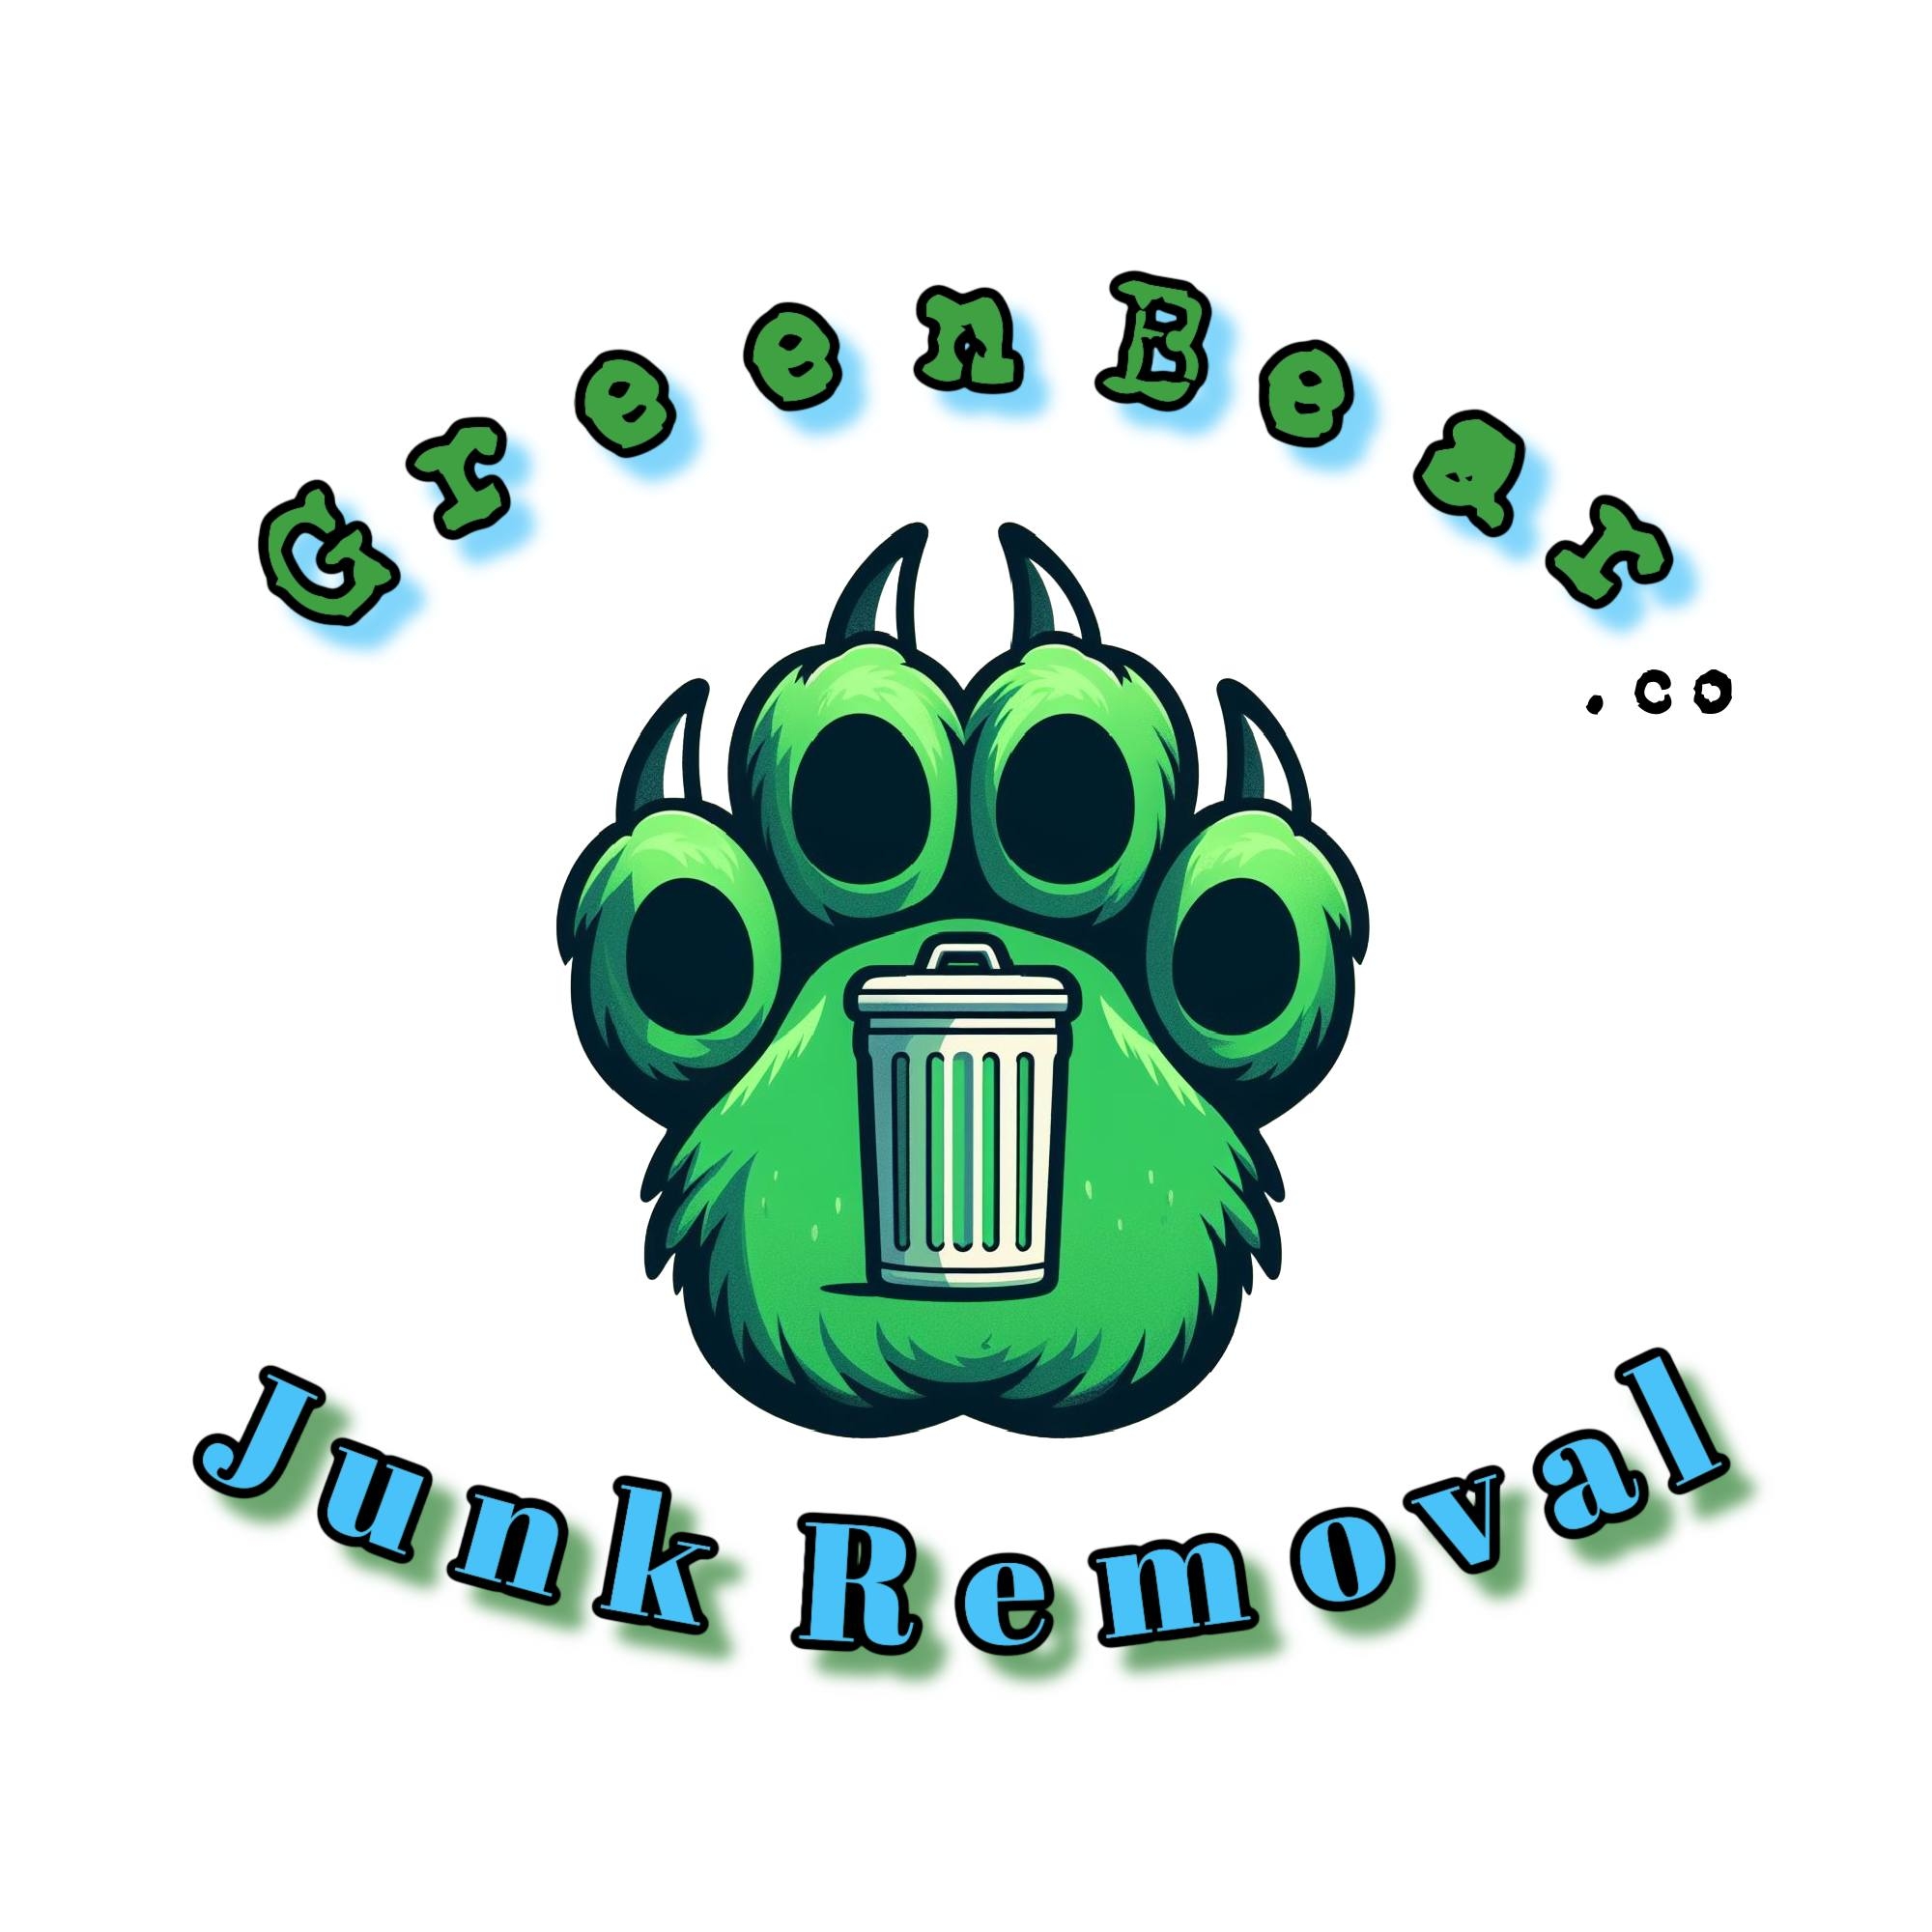 green bear cleaning junk removal logo